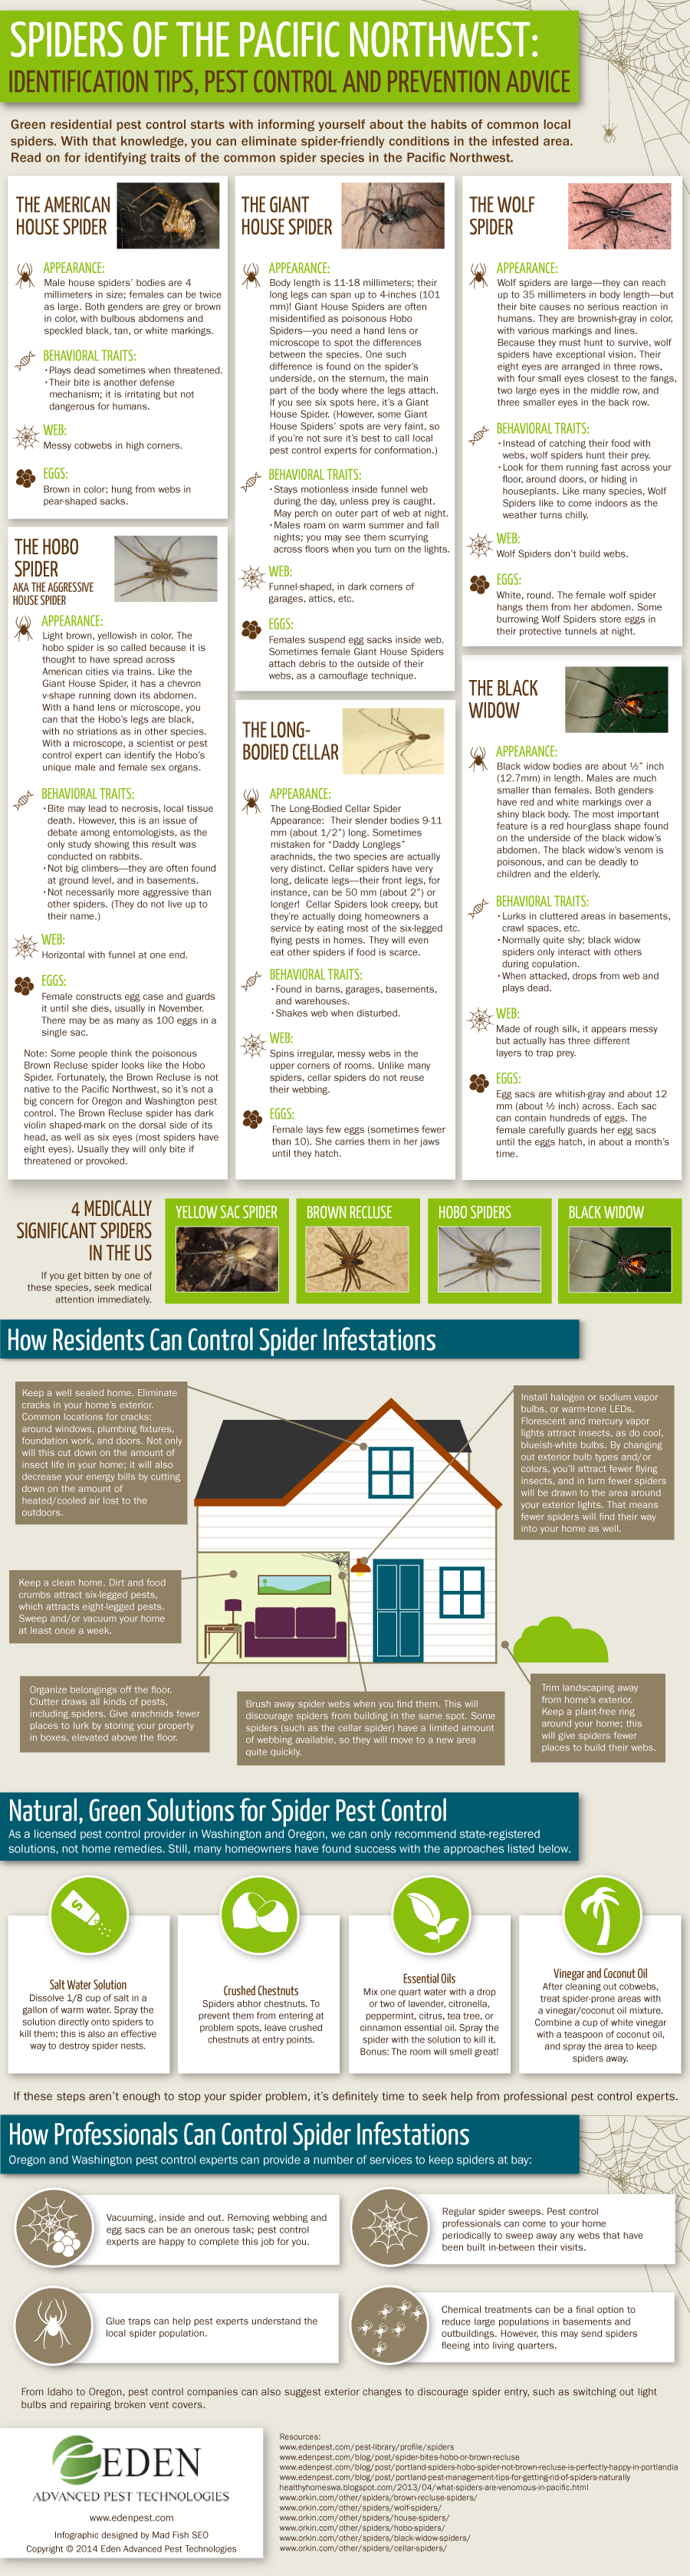 Spiders of the Pacific Northwest